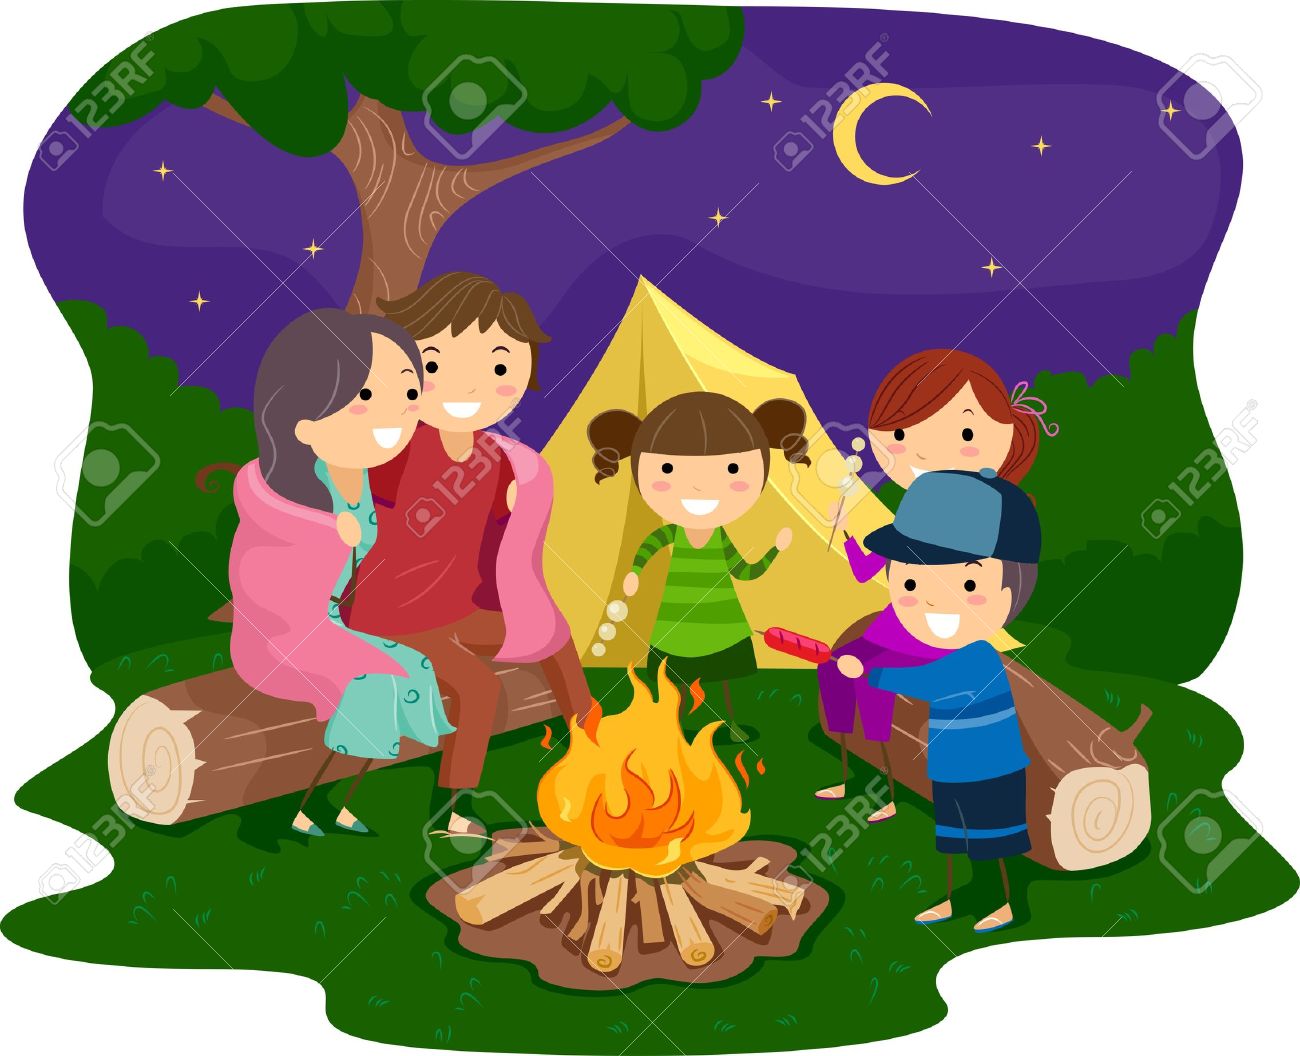 Make meme with family at campfire clipart